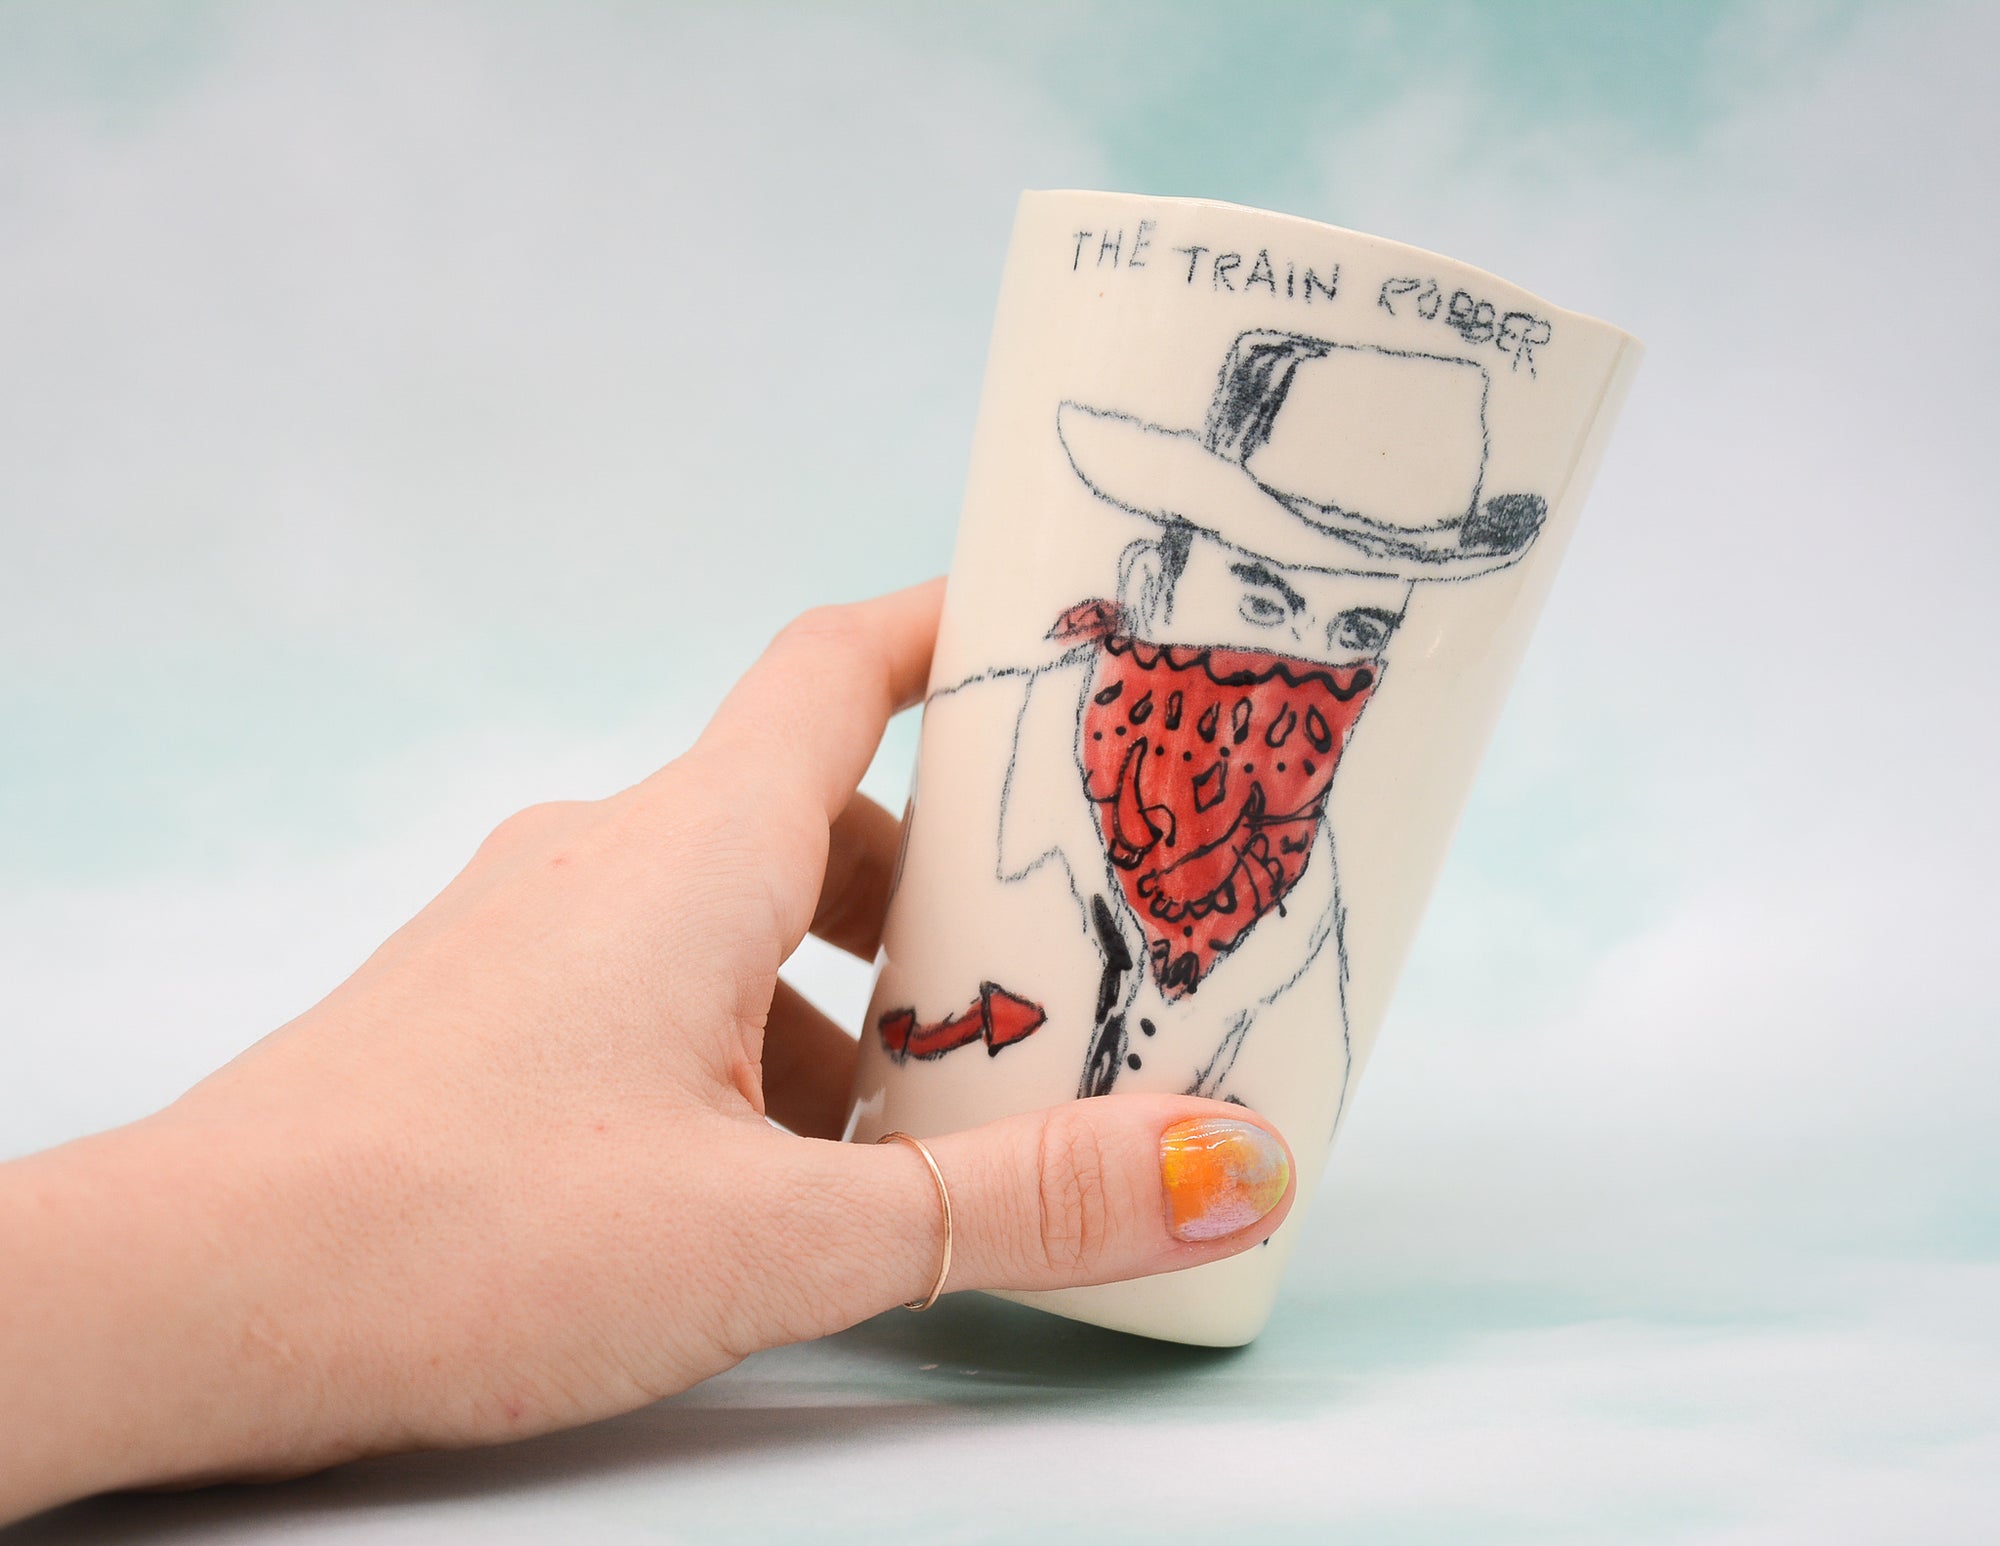 The Train Robber Cup